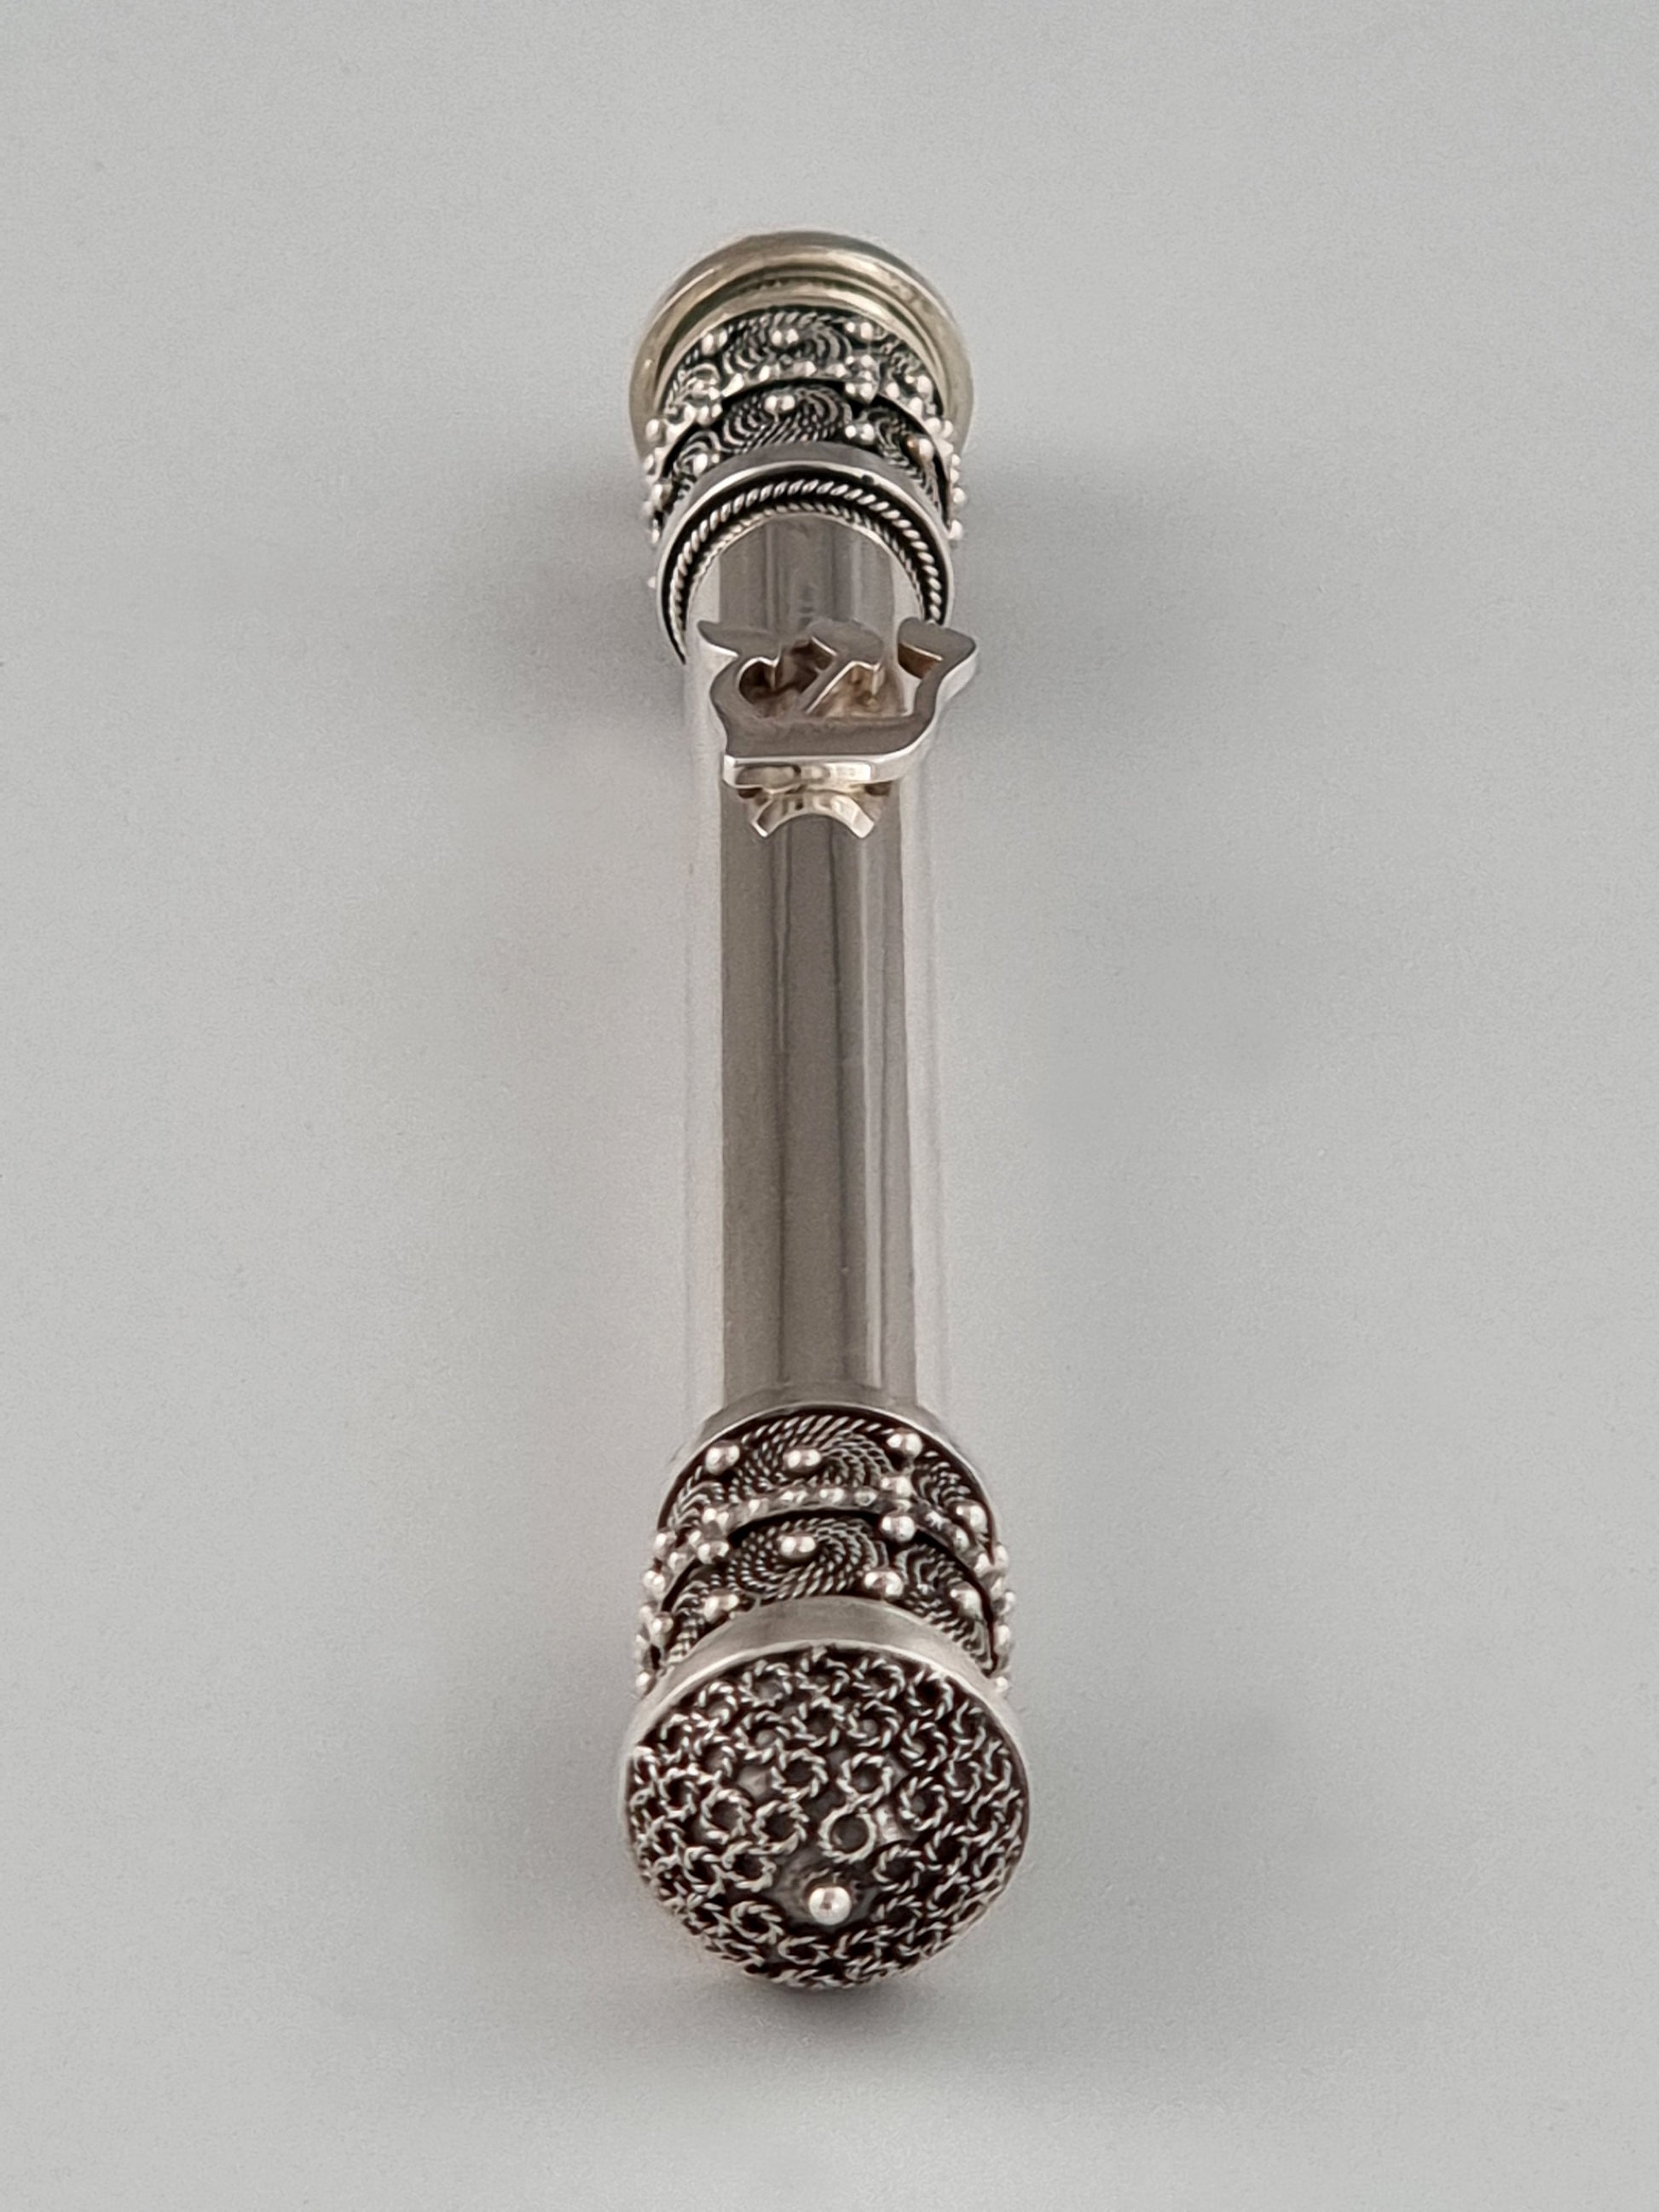 Sterling silver Mezuzah by Yaacov and Boaz Yemini. Both ends are heavily detailed and the center is round and smooth.